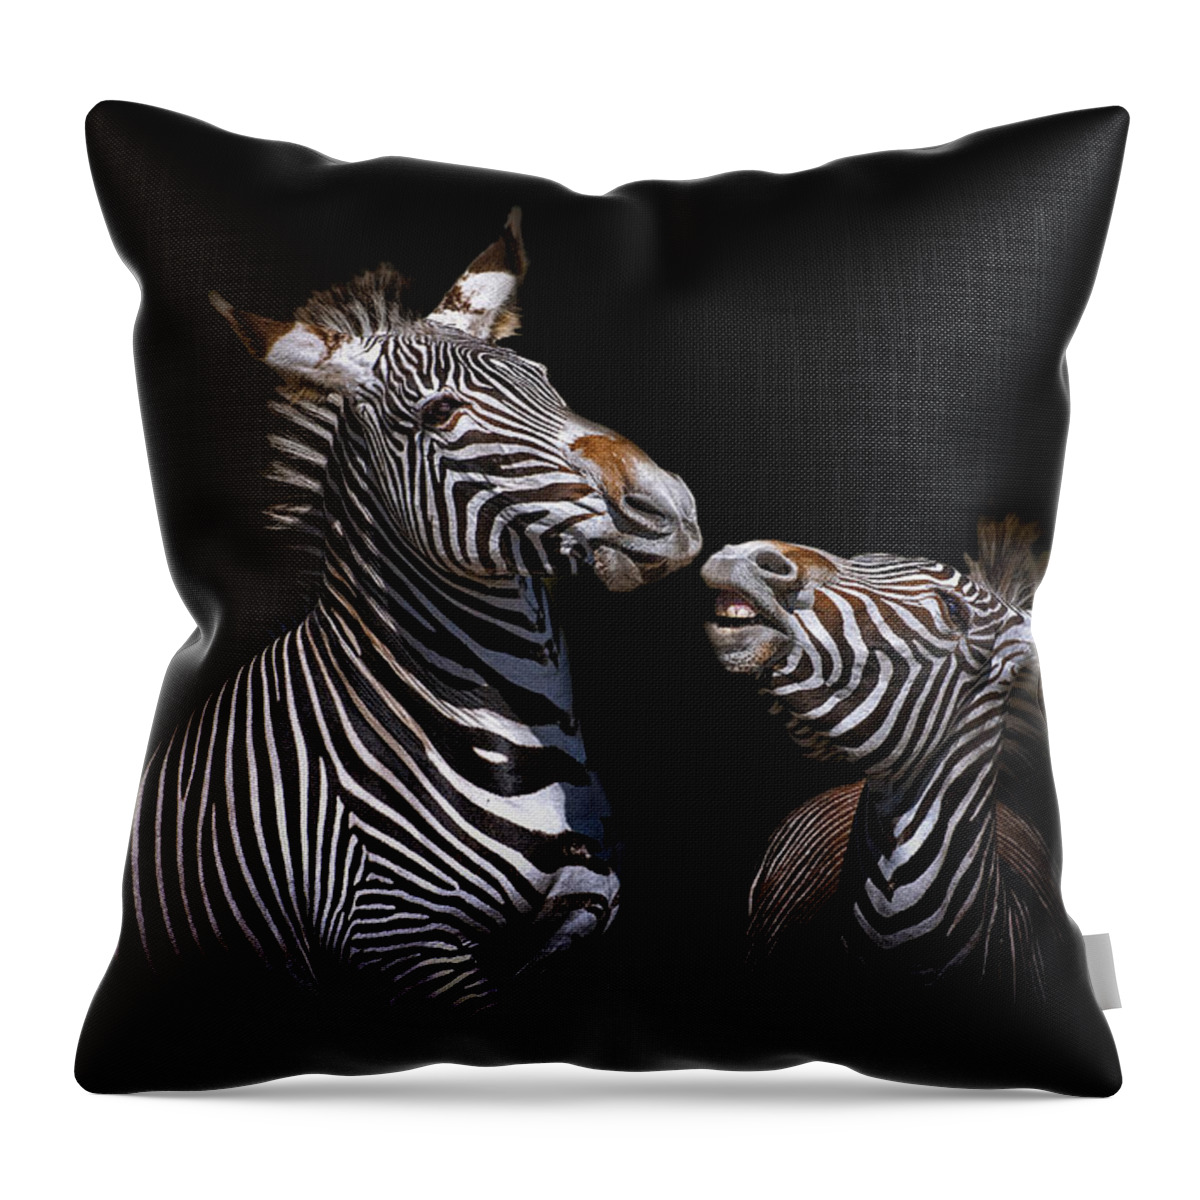 Zebra Throw Pillow featuring the photograph Conversation by Ghostwinds Photography